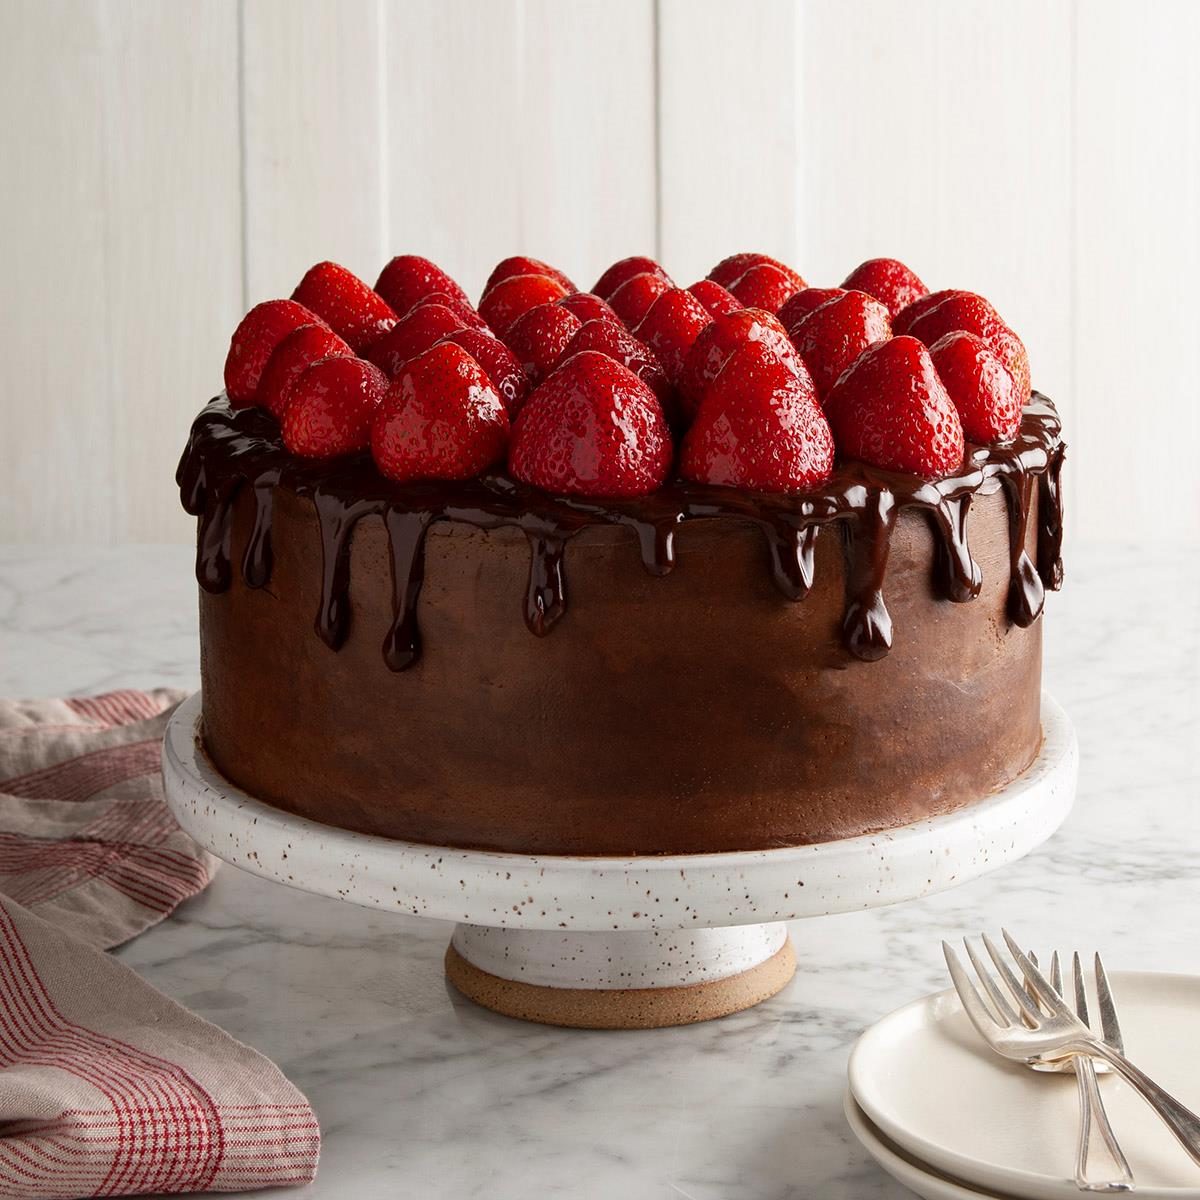 Chocolate Celebration Cake With Treacle Fudge Frosting | Tin and Thyme